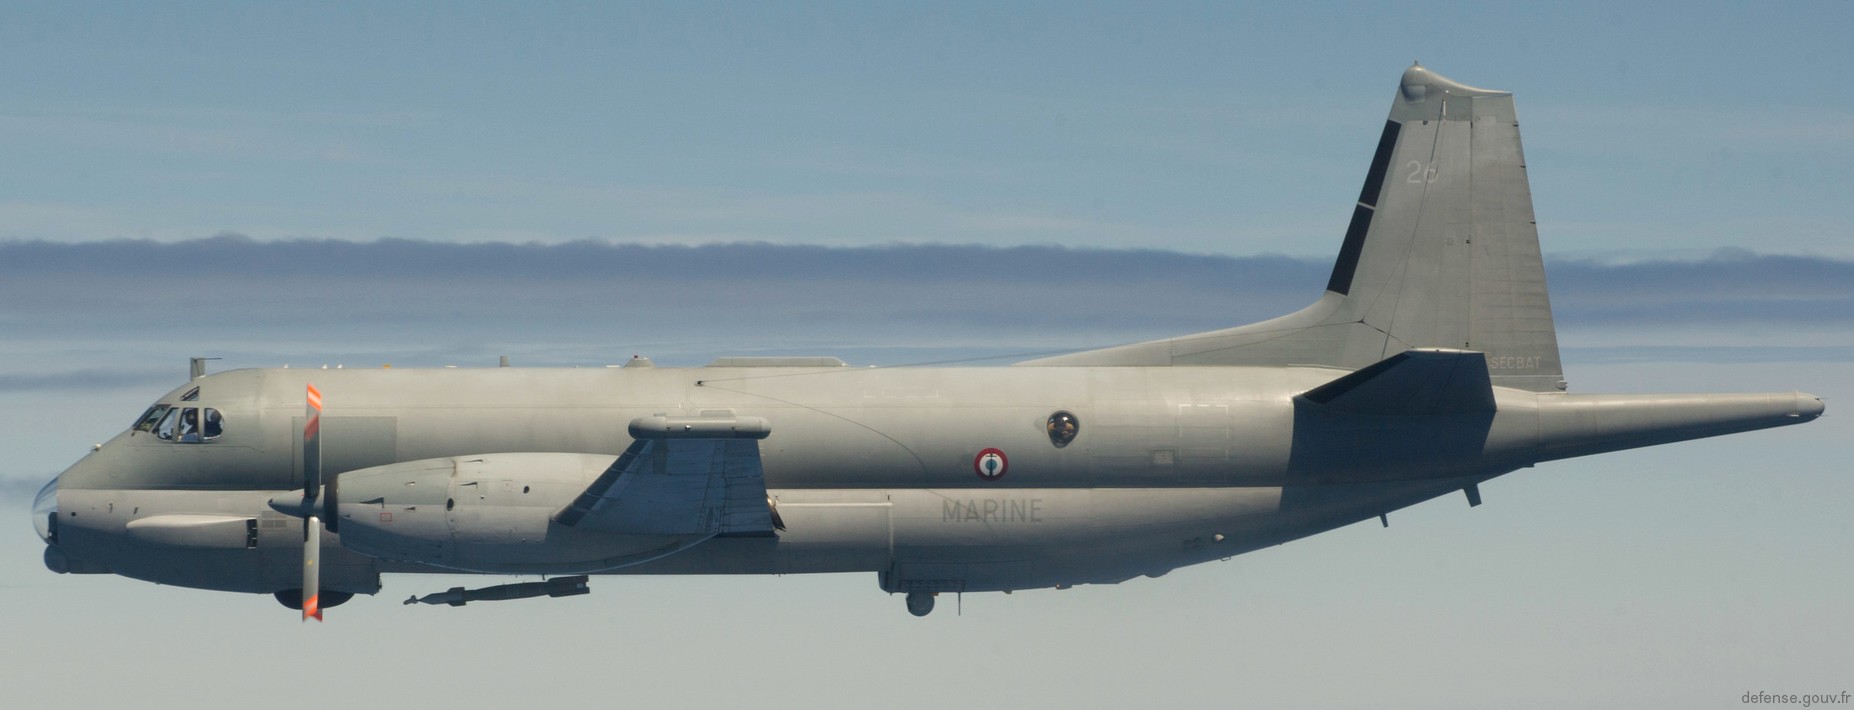 atlantique 2 br.1150 breguet dassault atl-2 french navy maritime patrol aircraft mpa marine nationale laser guided bomb 44